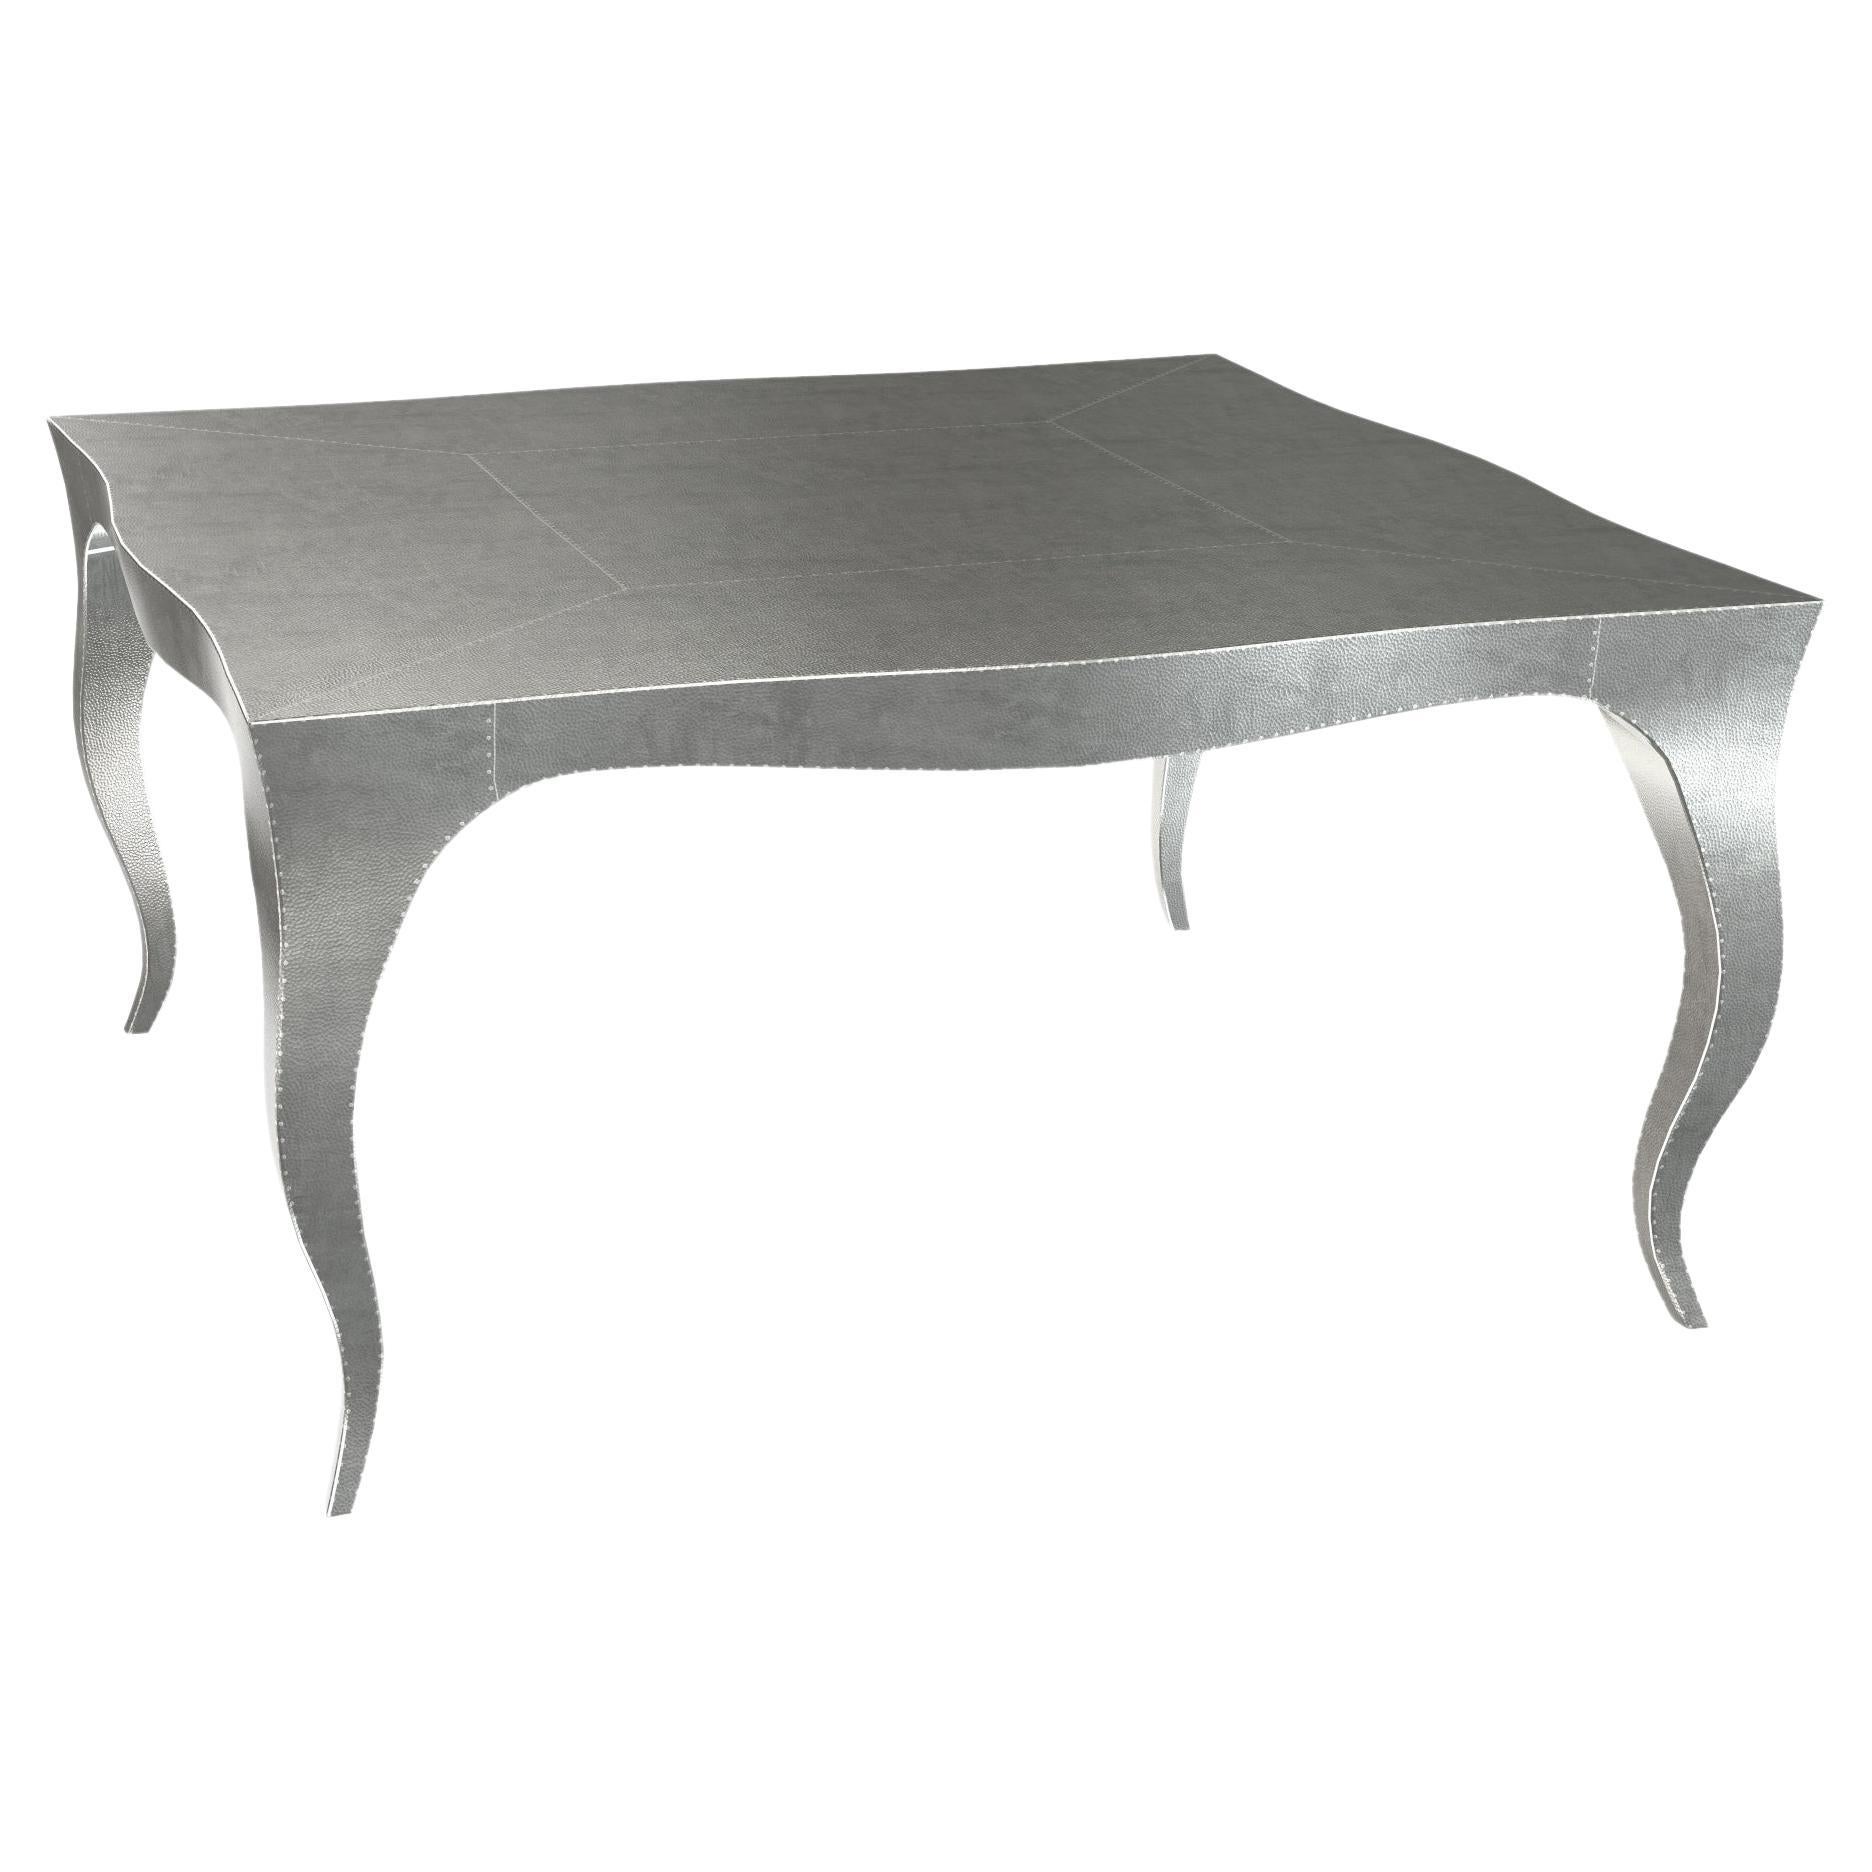 Louise Art Deco Industrial Tables Mid. Hammered White Bronze 18.5x18.5x10 inch For Sale